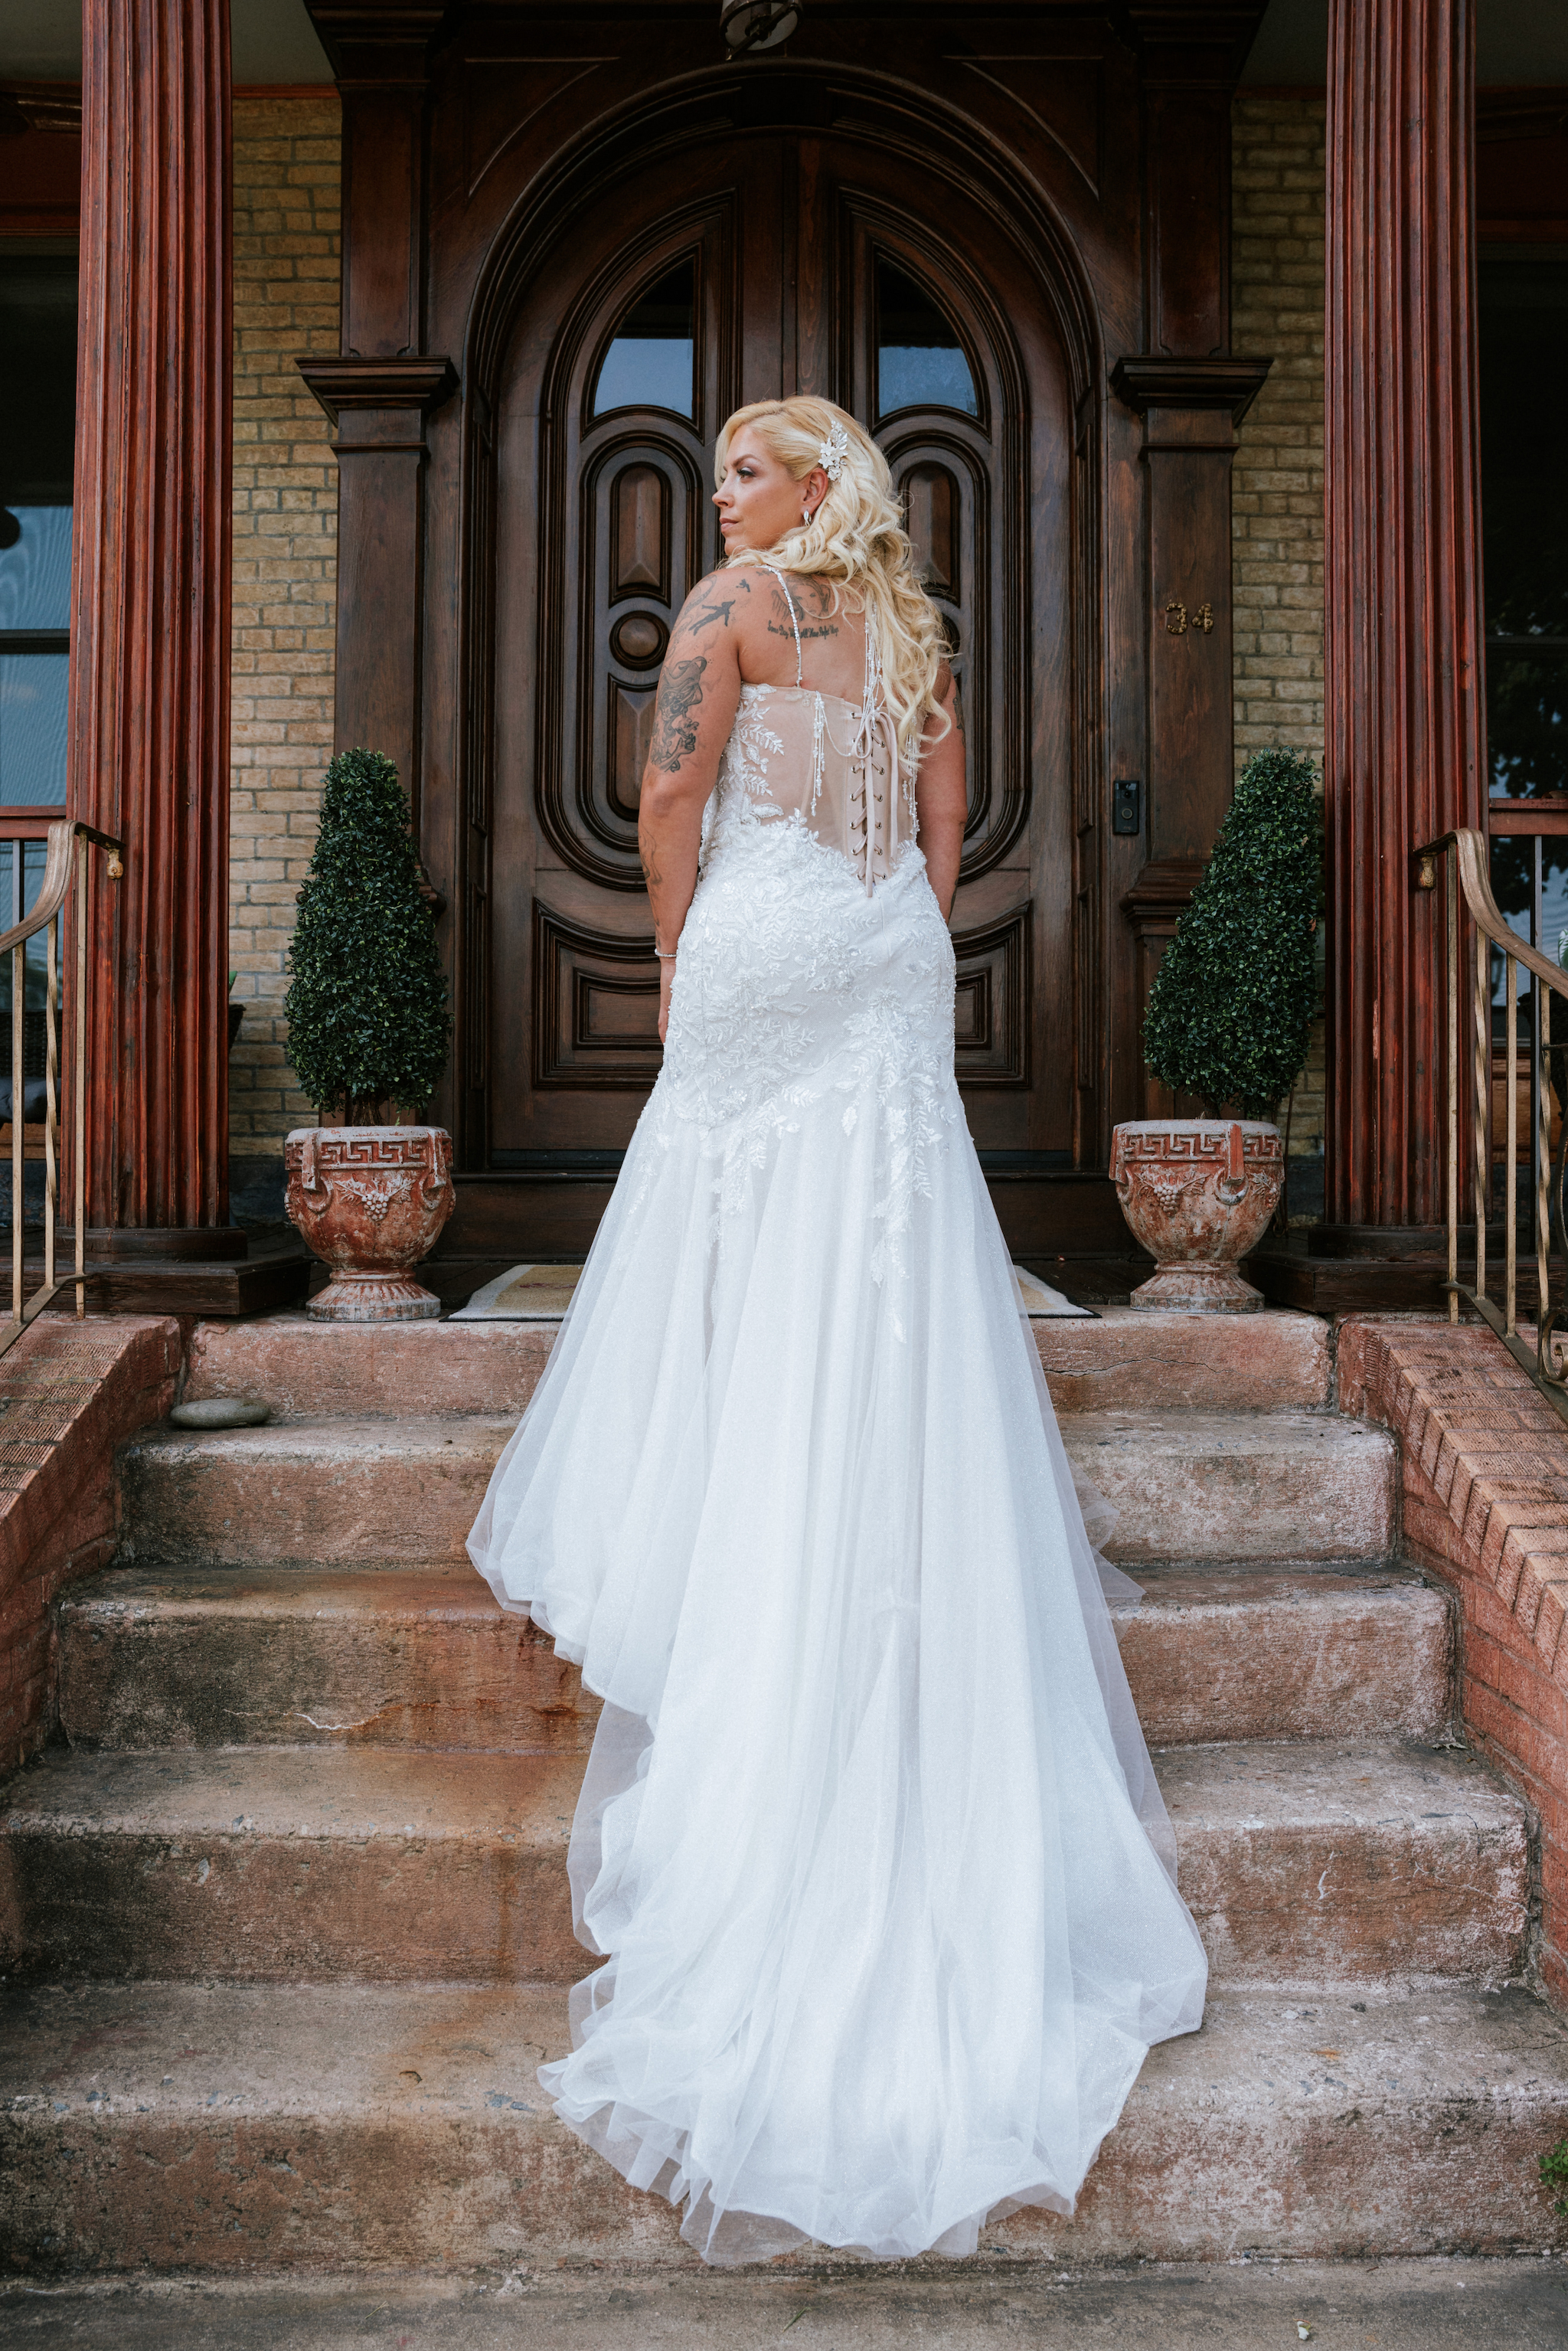 Wedding dress 5443 for Sale at NY City Bride